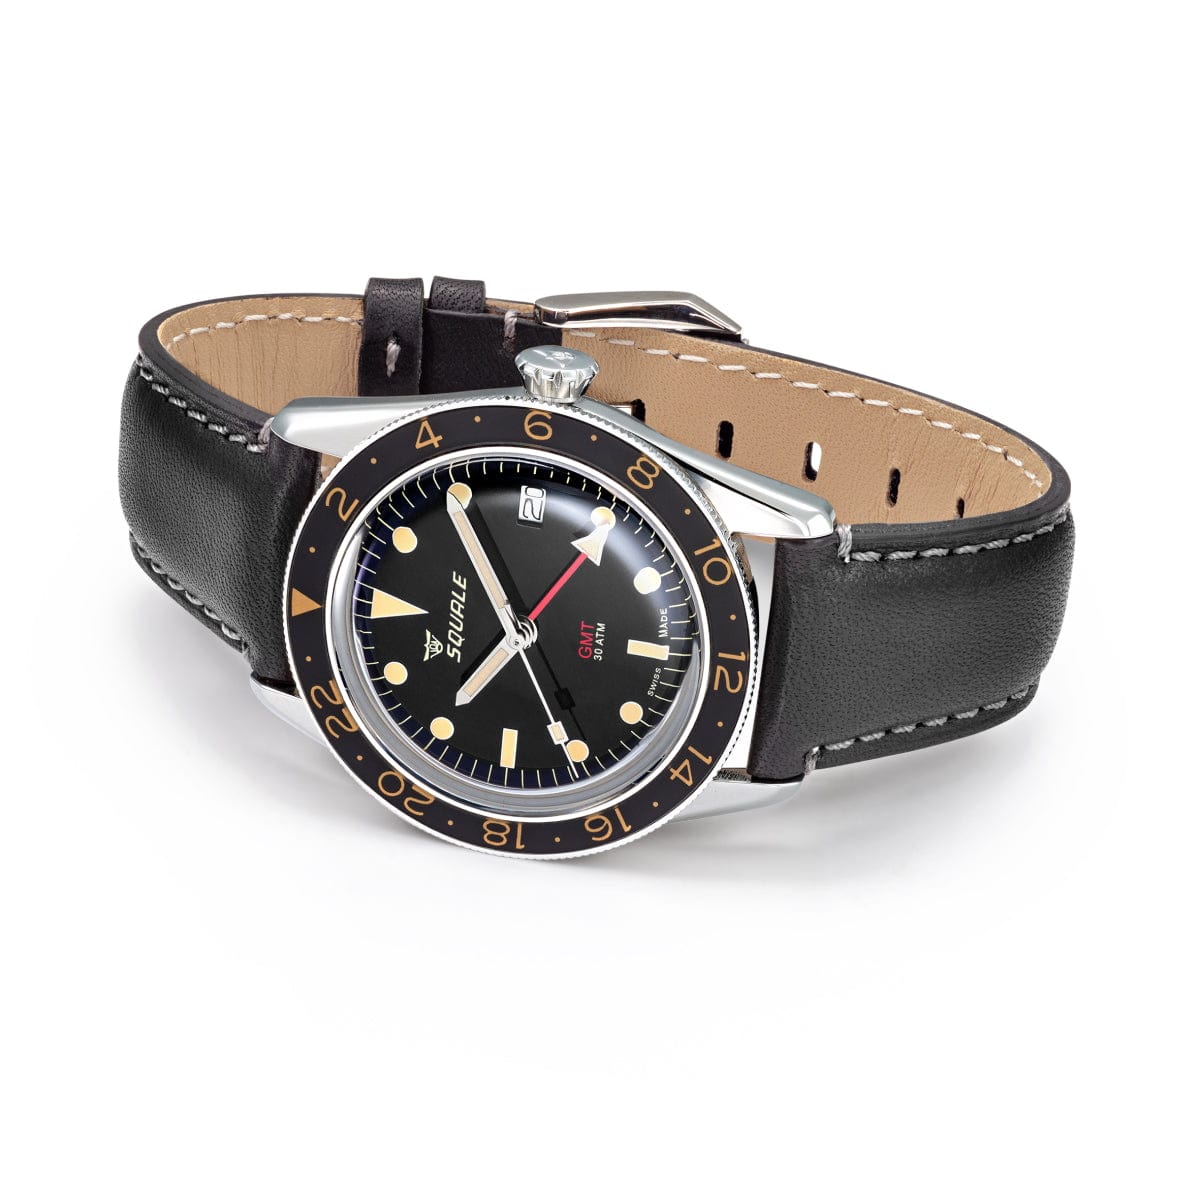 Squale Sub-39 GMT Vintage Swiss Made Diver's Watch